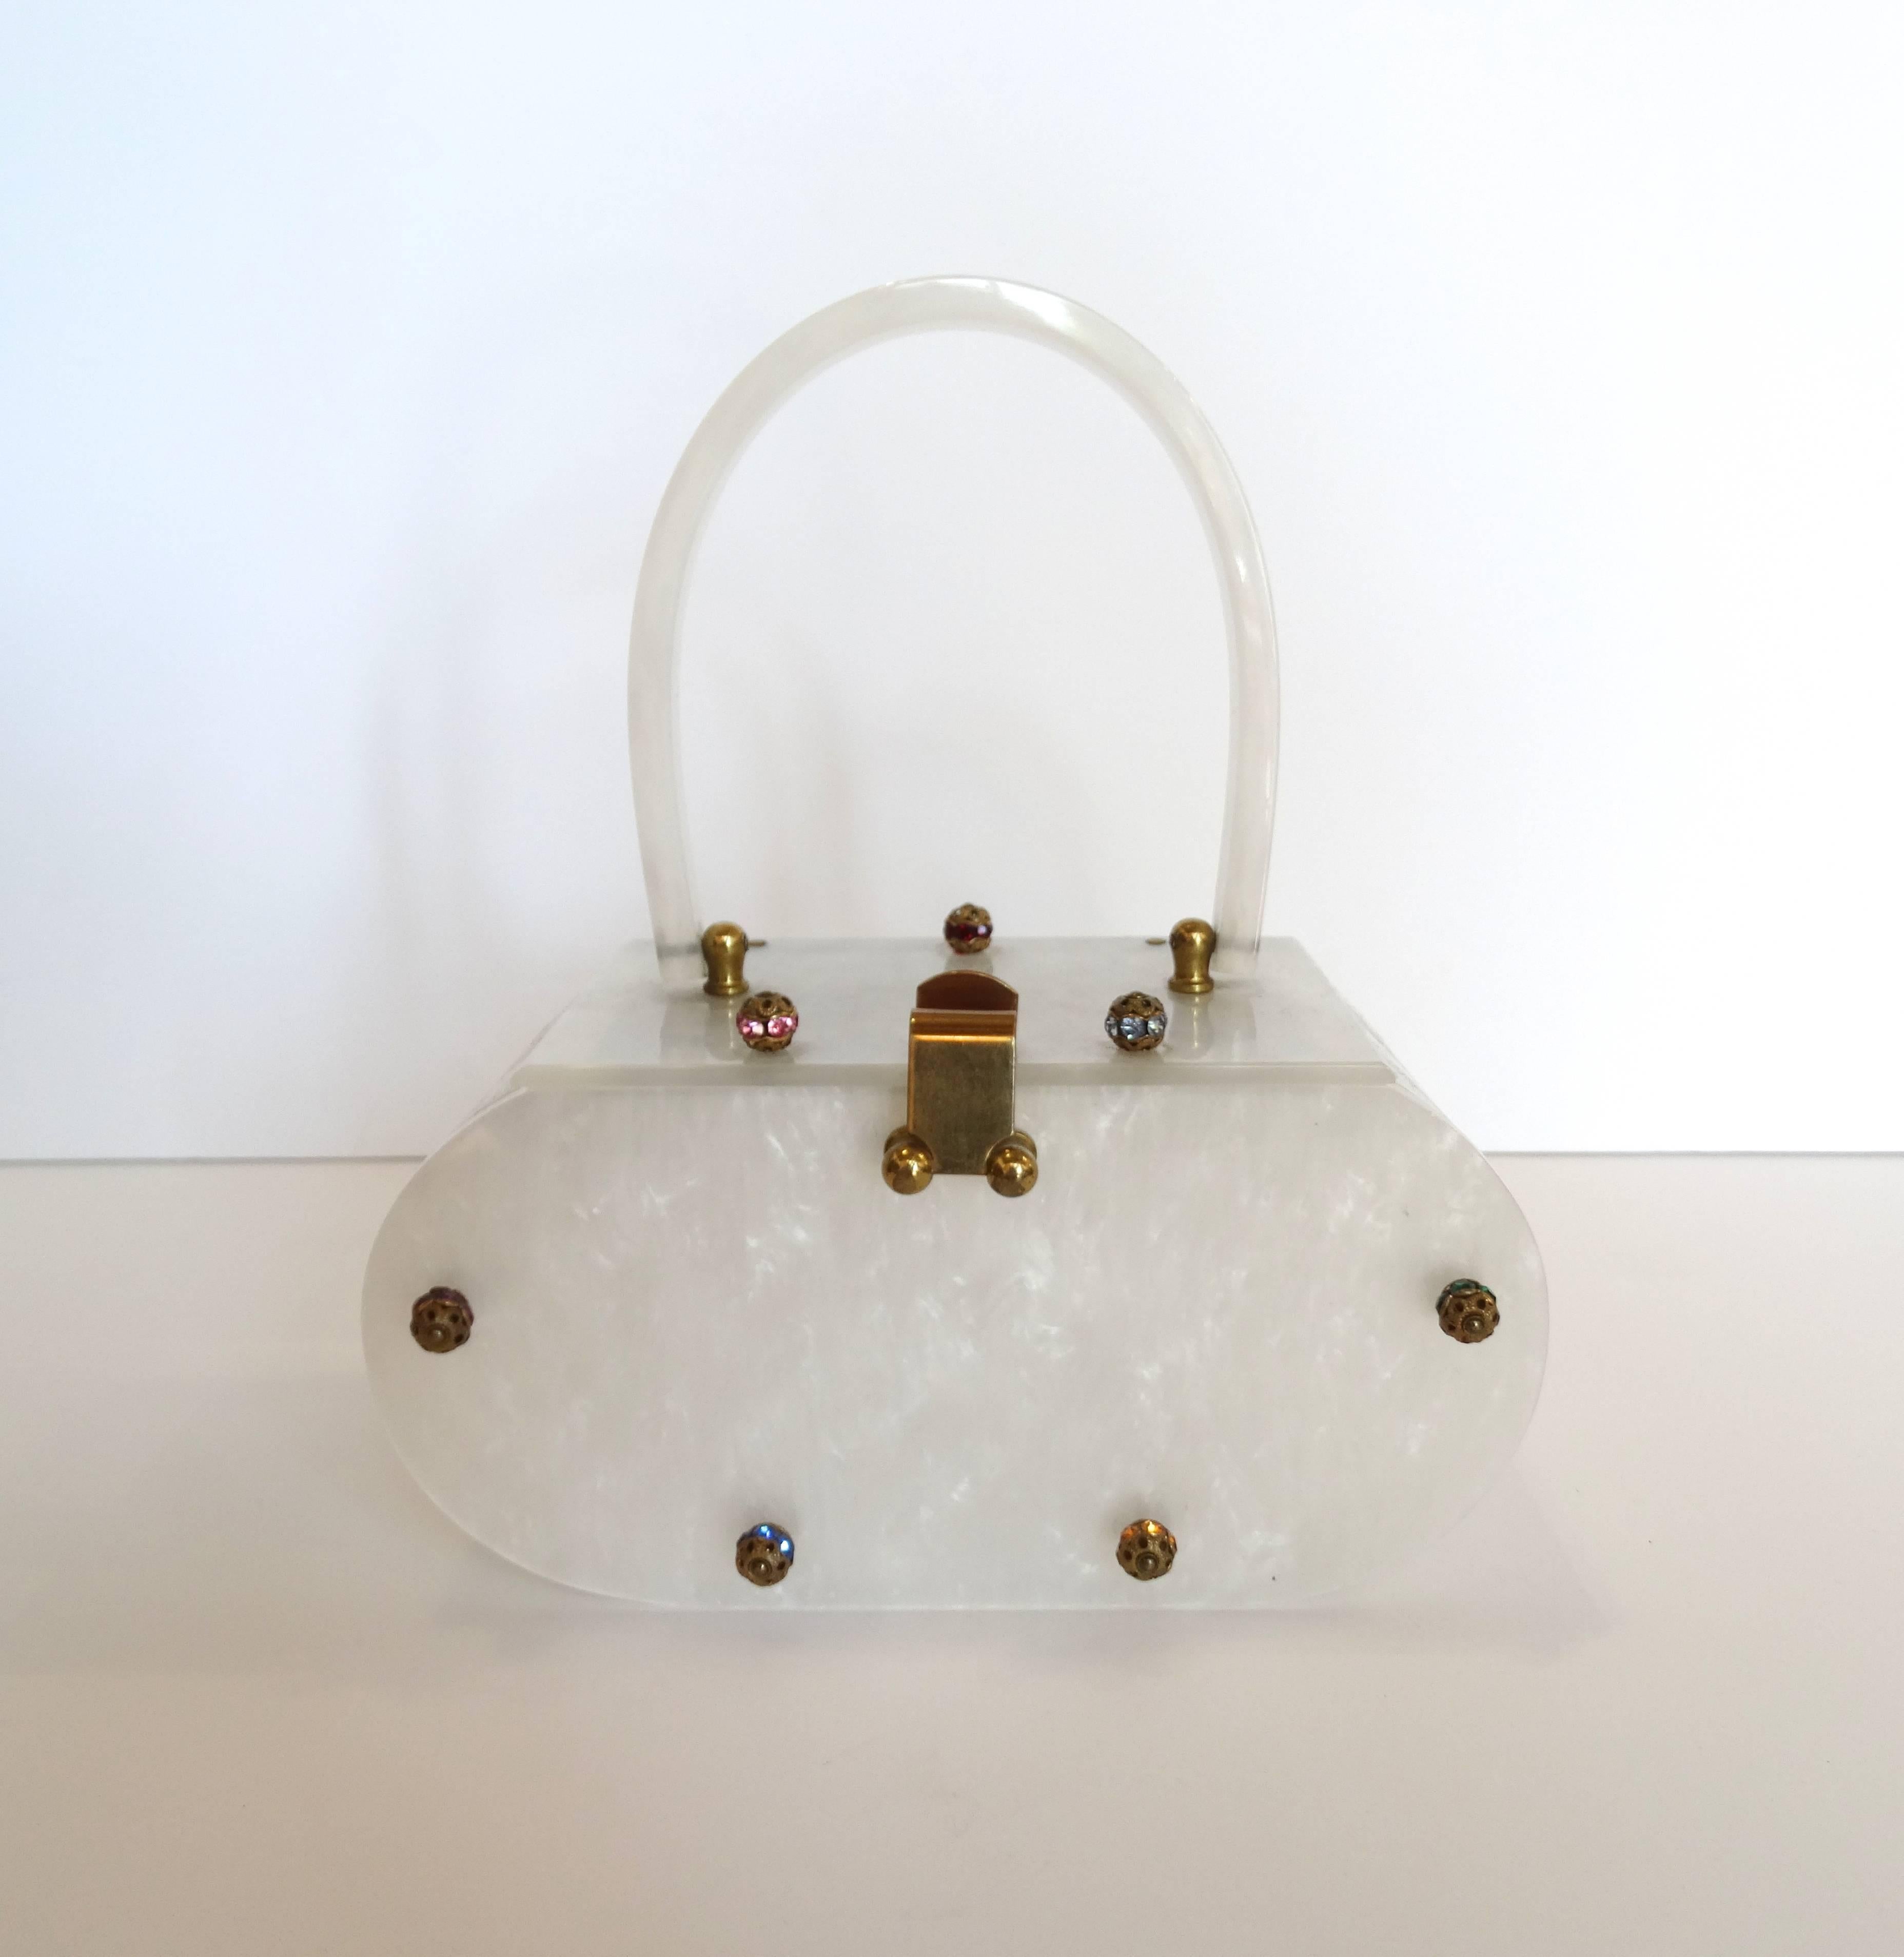 Fantastic 1960s Lucite evening bag! Accented with rhinestone orbs in an array of colors. Made of a milky, pearlescent lucite in a pill shaped structure. Stylish top handle folds over for easy storage. Hook closure snaps over the top. Bronze toned